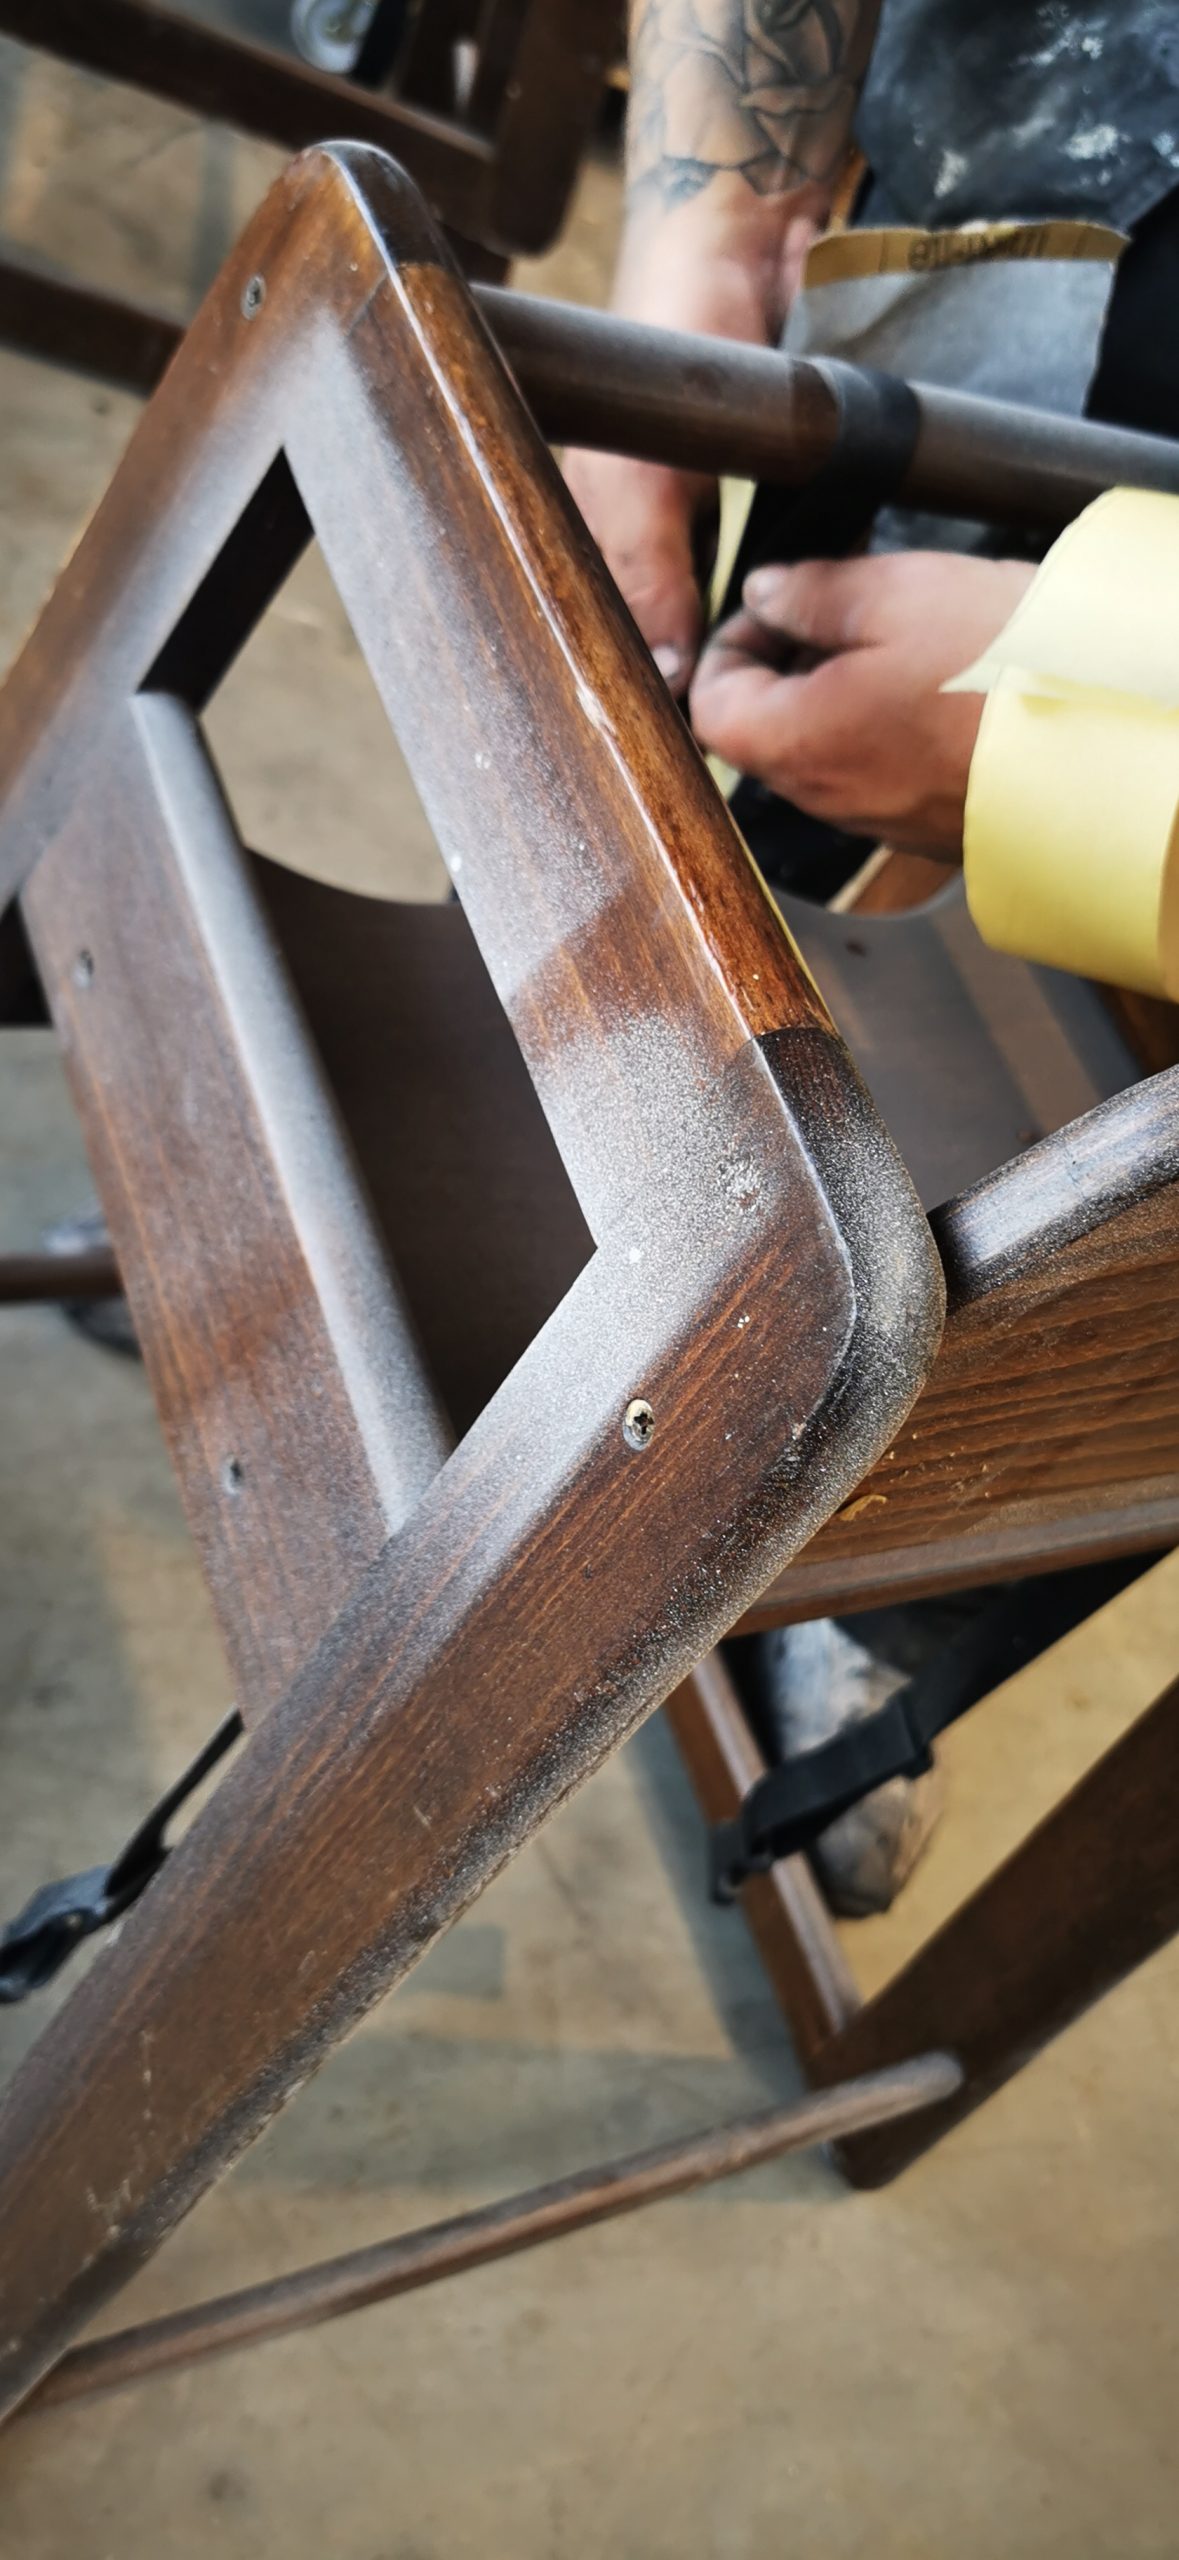 masking off areas on chair